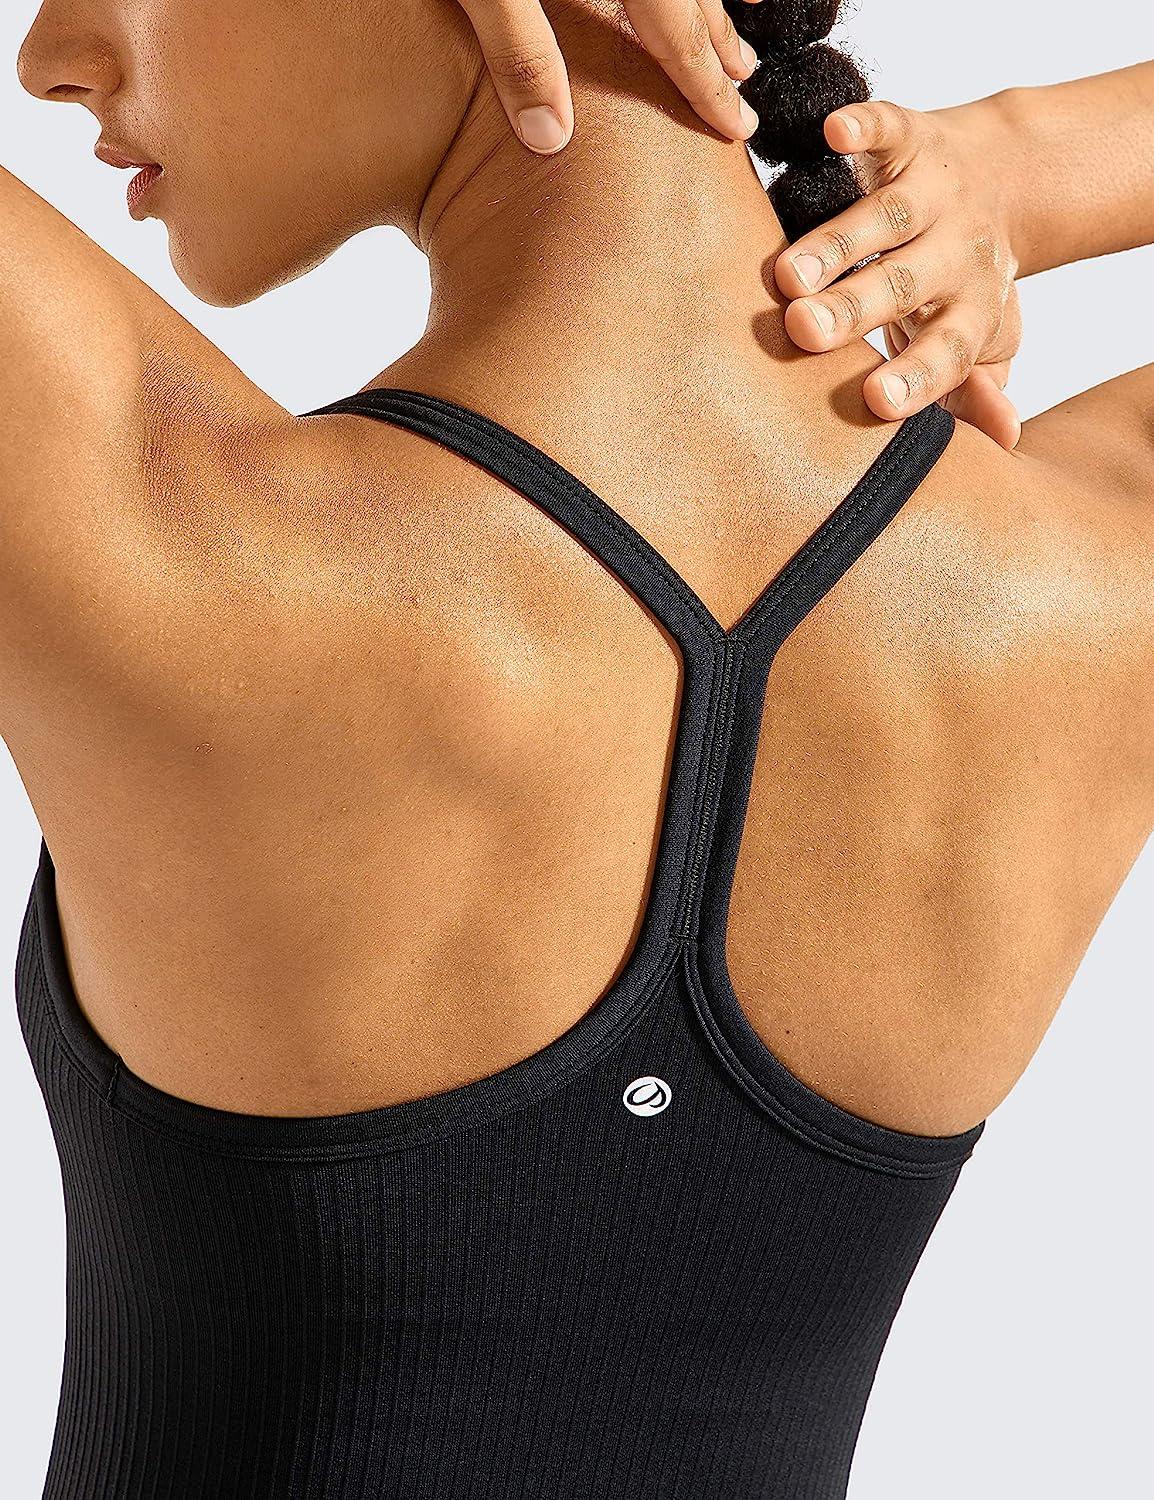 CRZ YOGA Womens Seamless Ribbed Racerback Tank Tops with Built in Bra -  Padded Scoop Neck Slimming Athletic Long Camisole - AliExpress